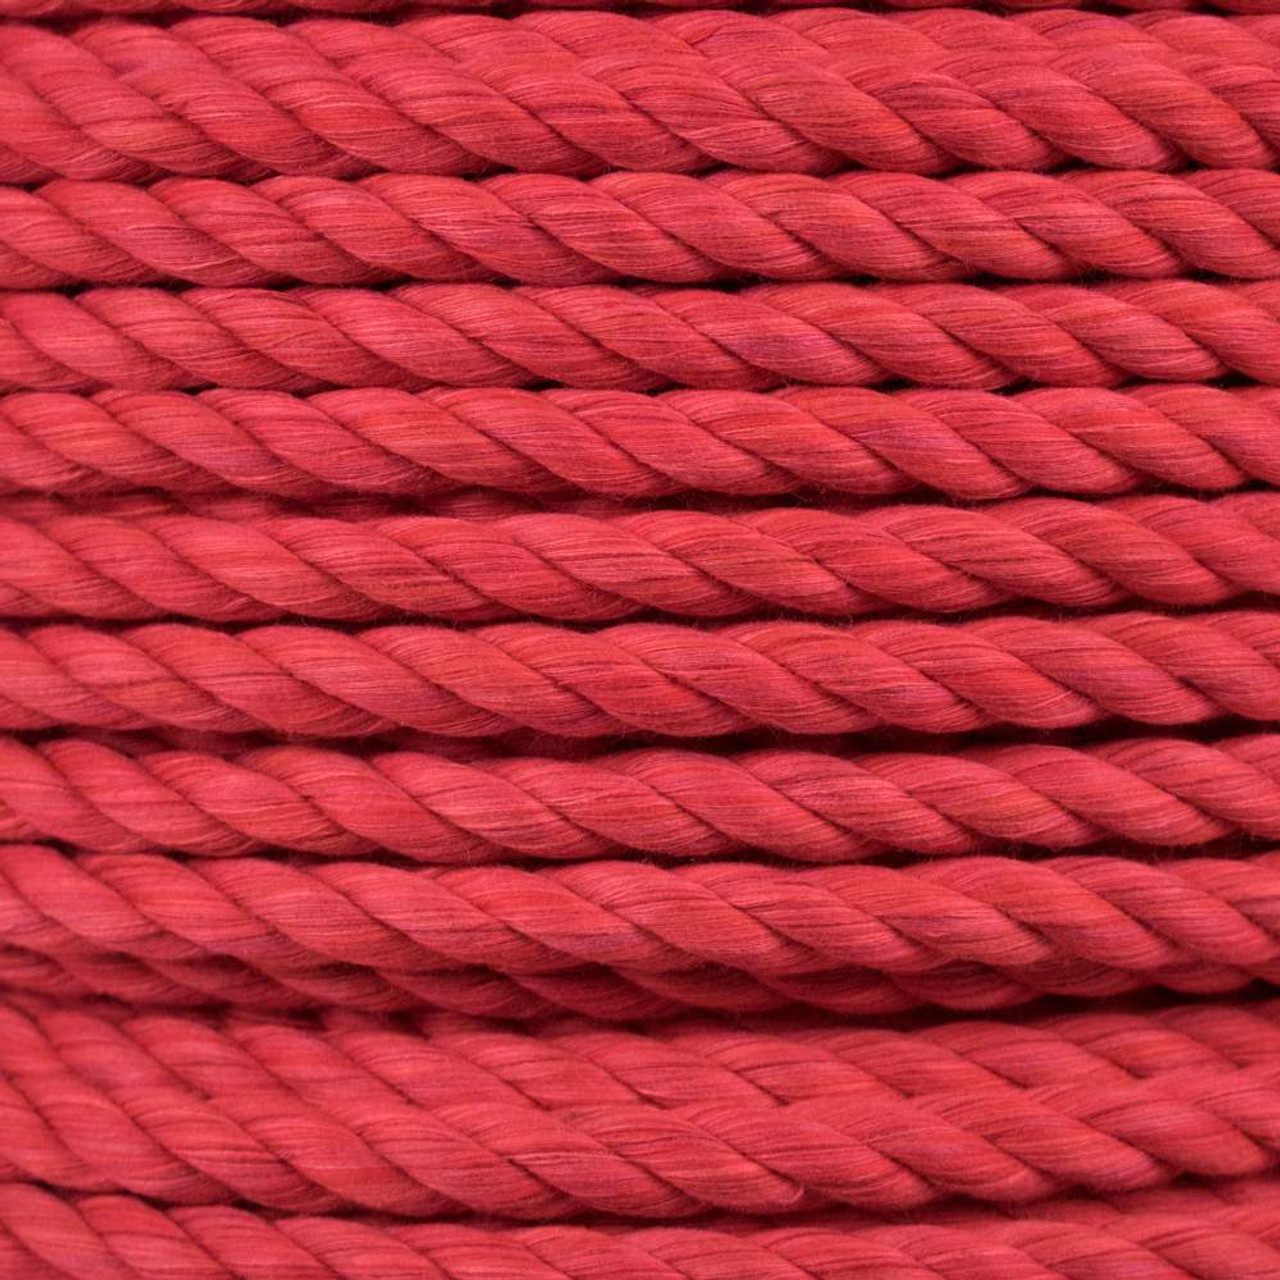 3-Strand Twisted Cotton 1/2 inch Rope - Red